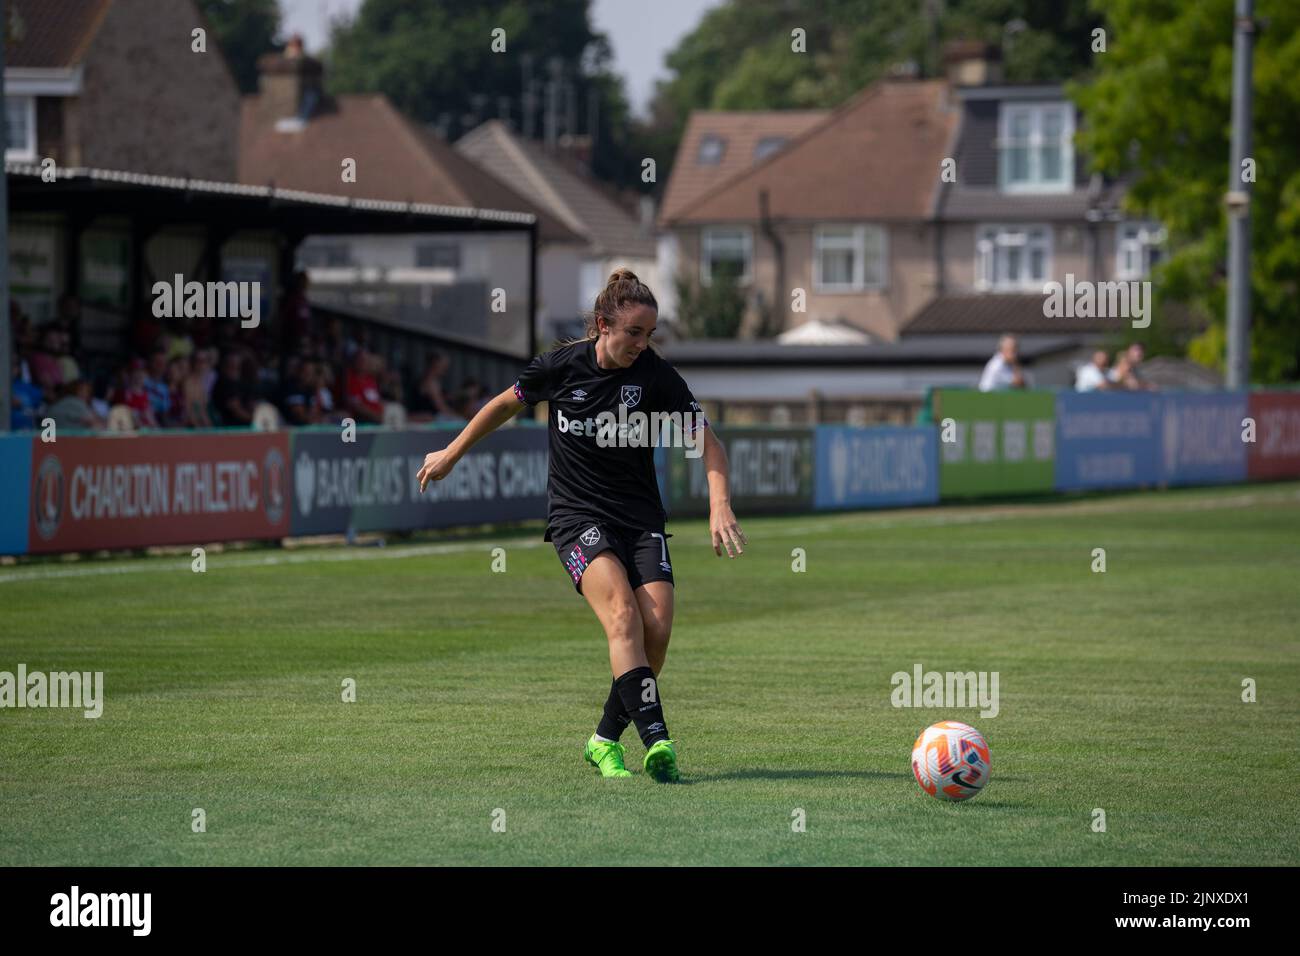 London, UK. 14th Aug, 2022. London, England, August 14th, 2022: Lisa Evans (#7 West Ham) passes the ball during the pre-season fixture between Charlton Athletic and West Ham United at The Oakwood, London. (James Whitehead/SPP) Credit: SPP Sport Press Photo. /Alamy Live News Stock Photo